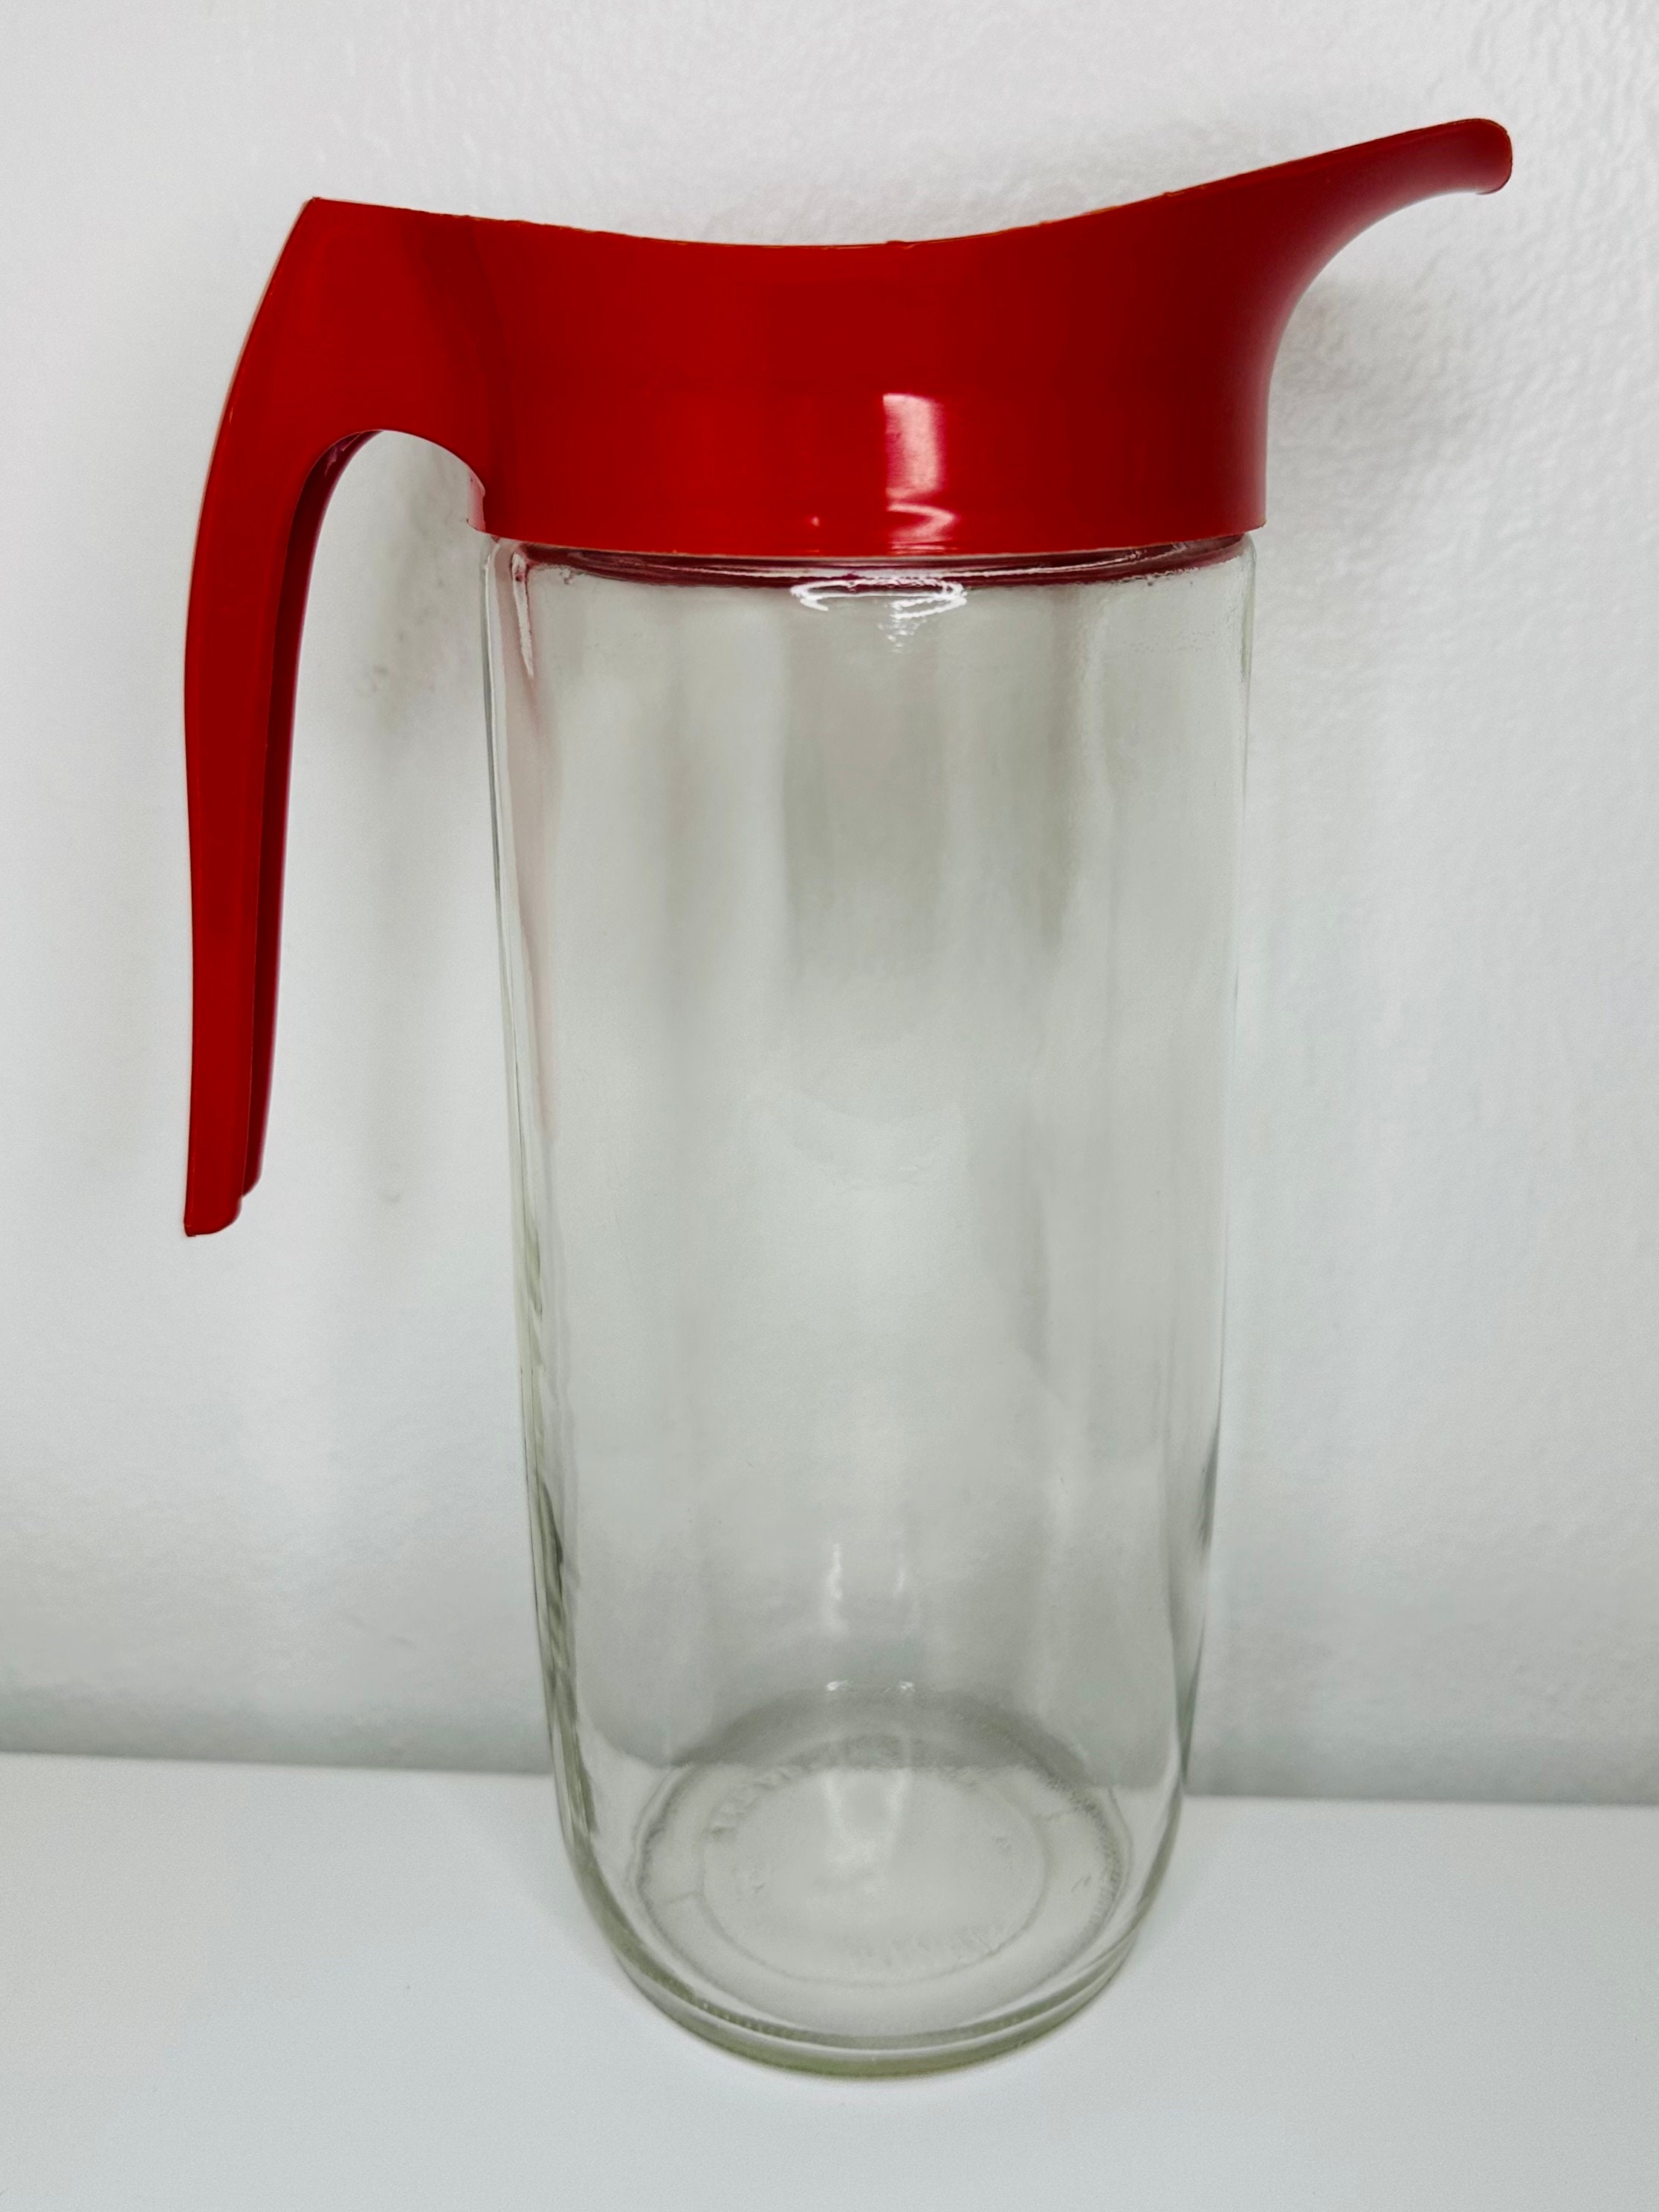 2 Quarts Plastic Pitcher With Lid, Clear Wide Plastic Pitcher Great for  Iced Tea, Sangria, Lemonade YE393.822 